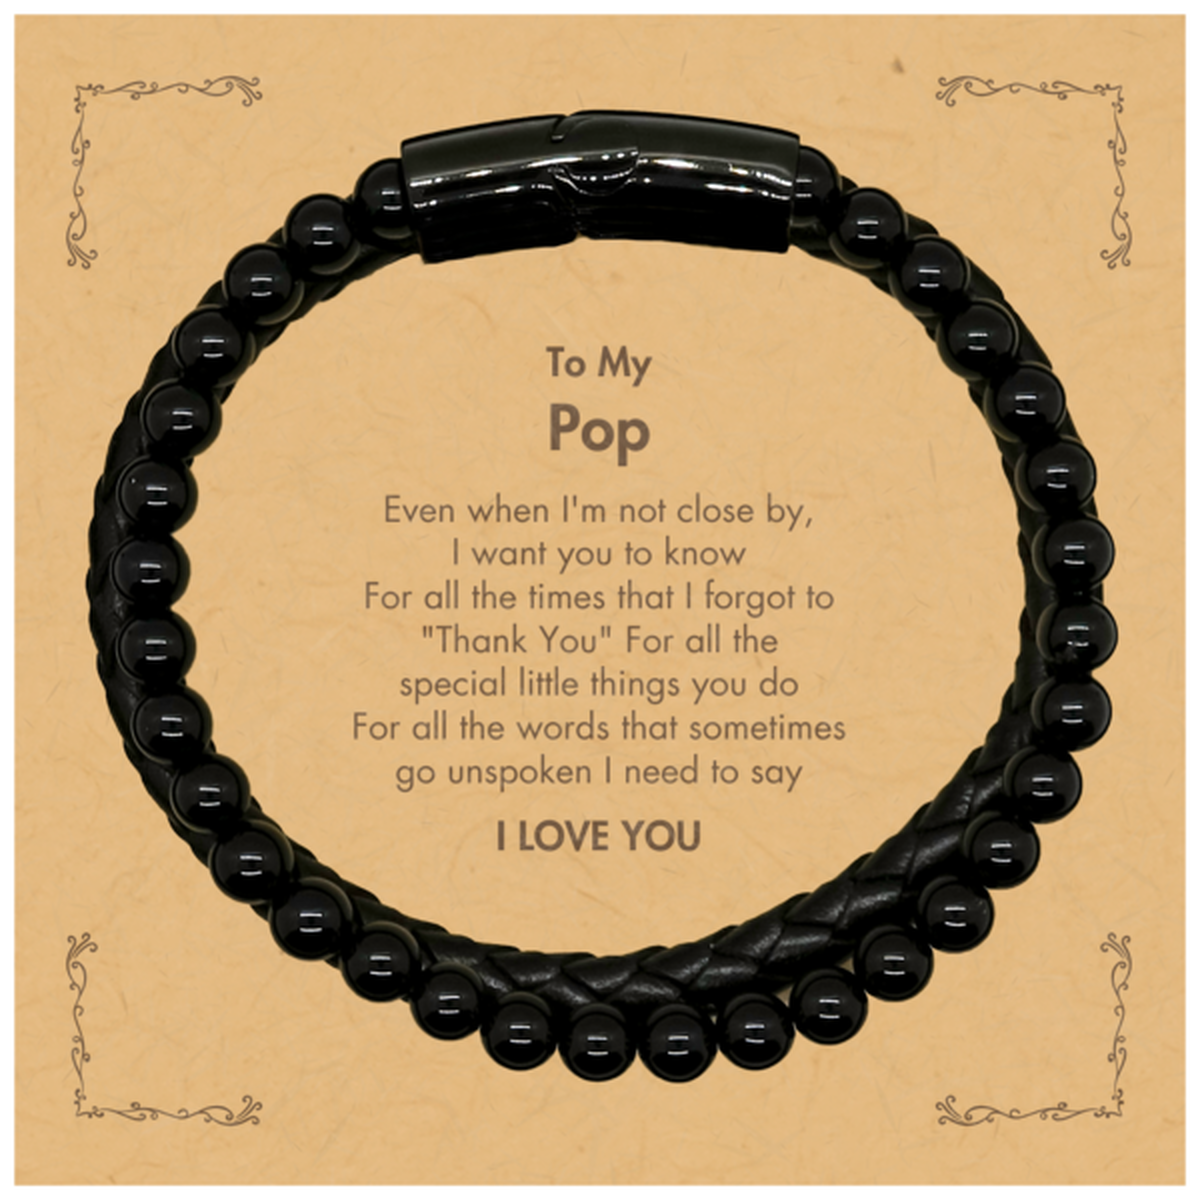 Thank You Gifts for Pop, Keepsake Stone Leather Bracelets Gifts for Pop Birthday Mother's day Father's Day Pop For all the words That sometimes go unspoken I need to say I LOVE YOU